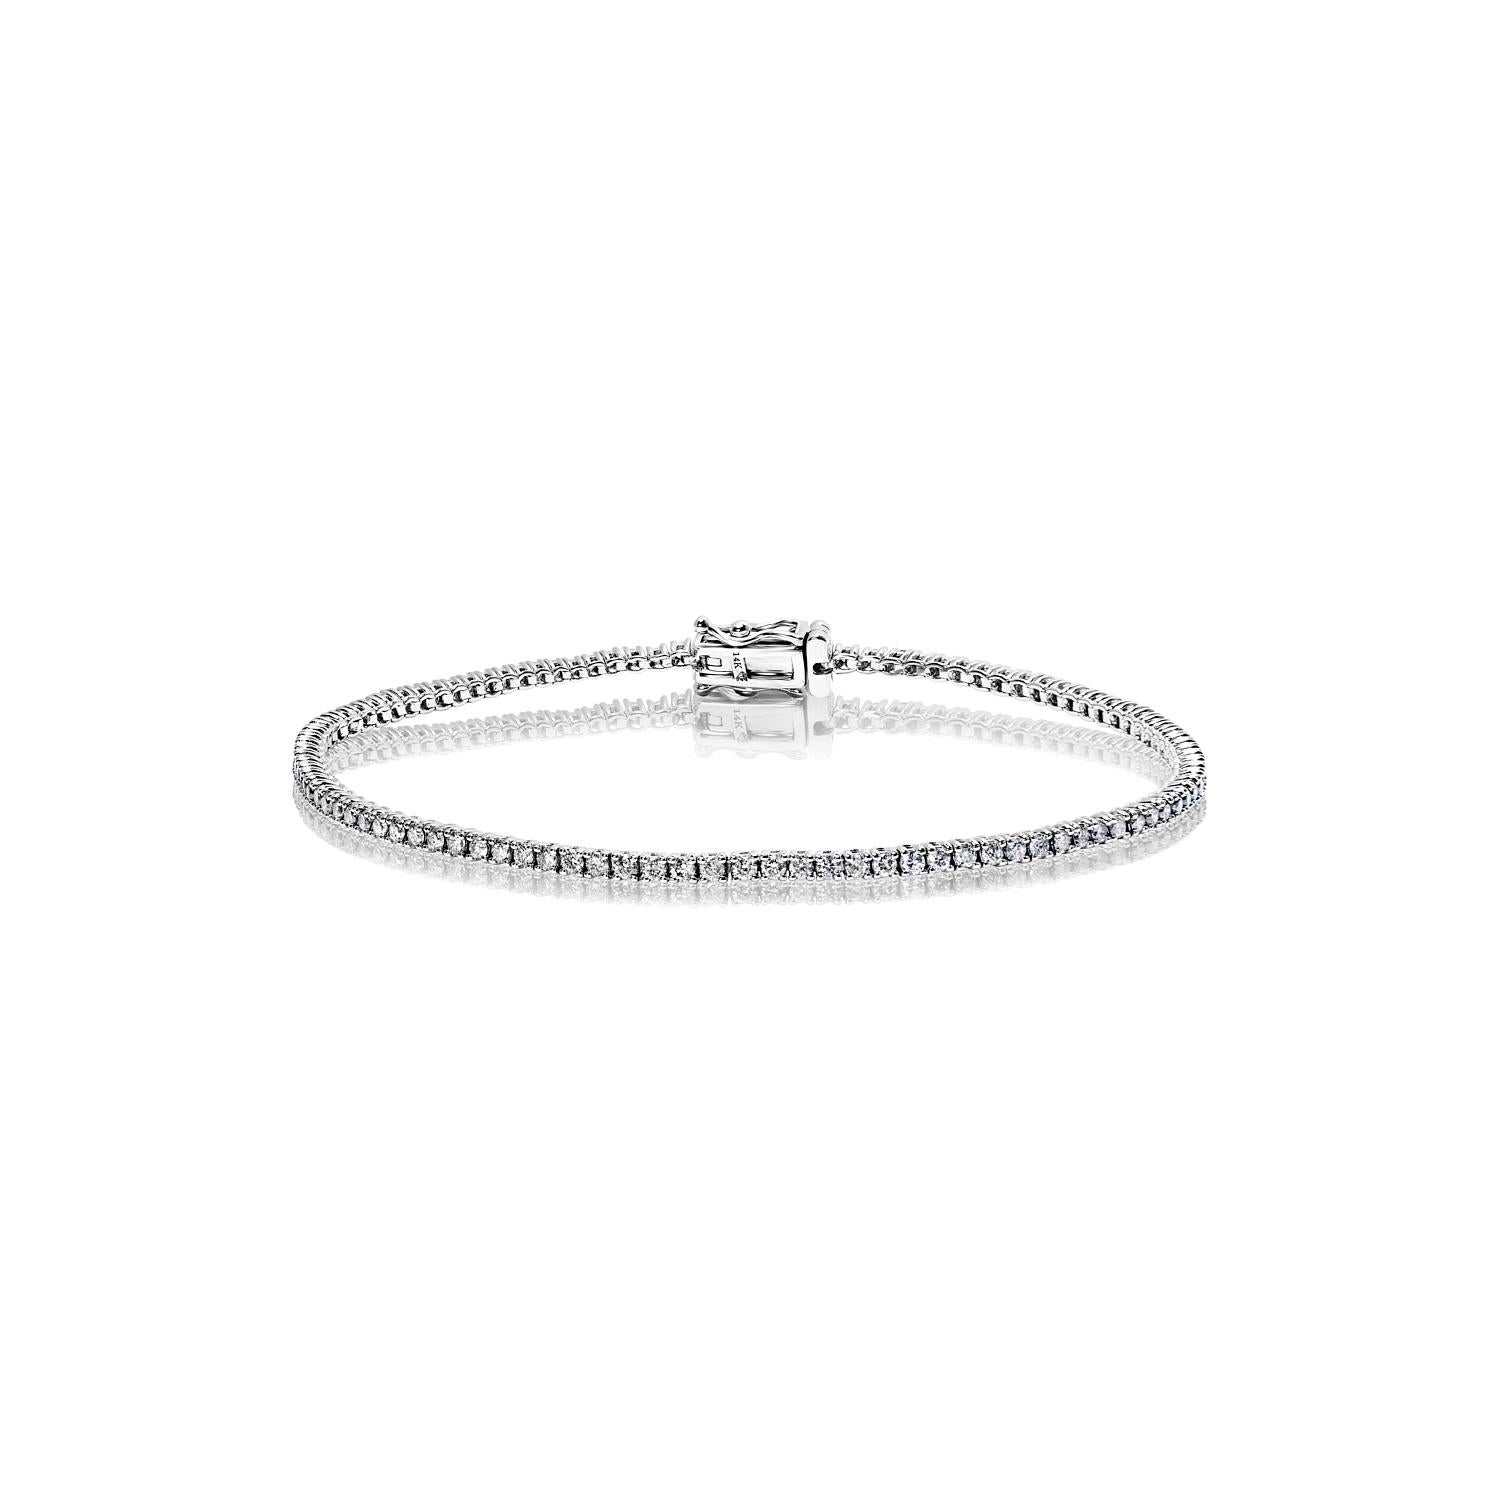 The IVANNA 2 Carat Single Diamond Tennis Bracelet features Round Brilliant CUT DIAMONDS brilliants weighing a total of approximately 2 carats, set in 14K White Gold.

Style:
Diamonds
Diamond Size: 2.00 Carats
Diamond Shape: Round Brilliant